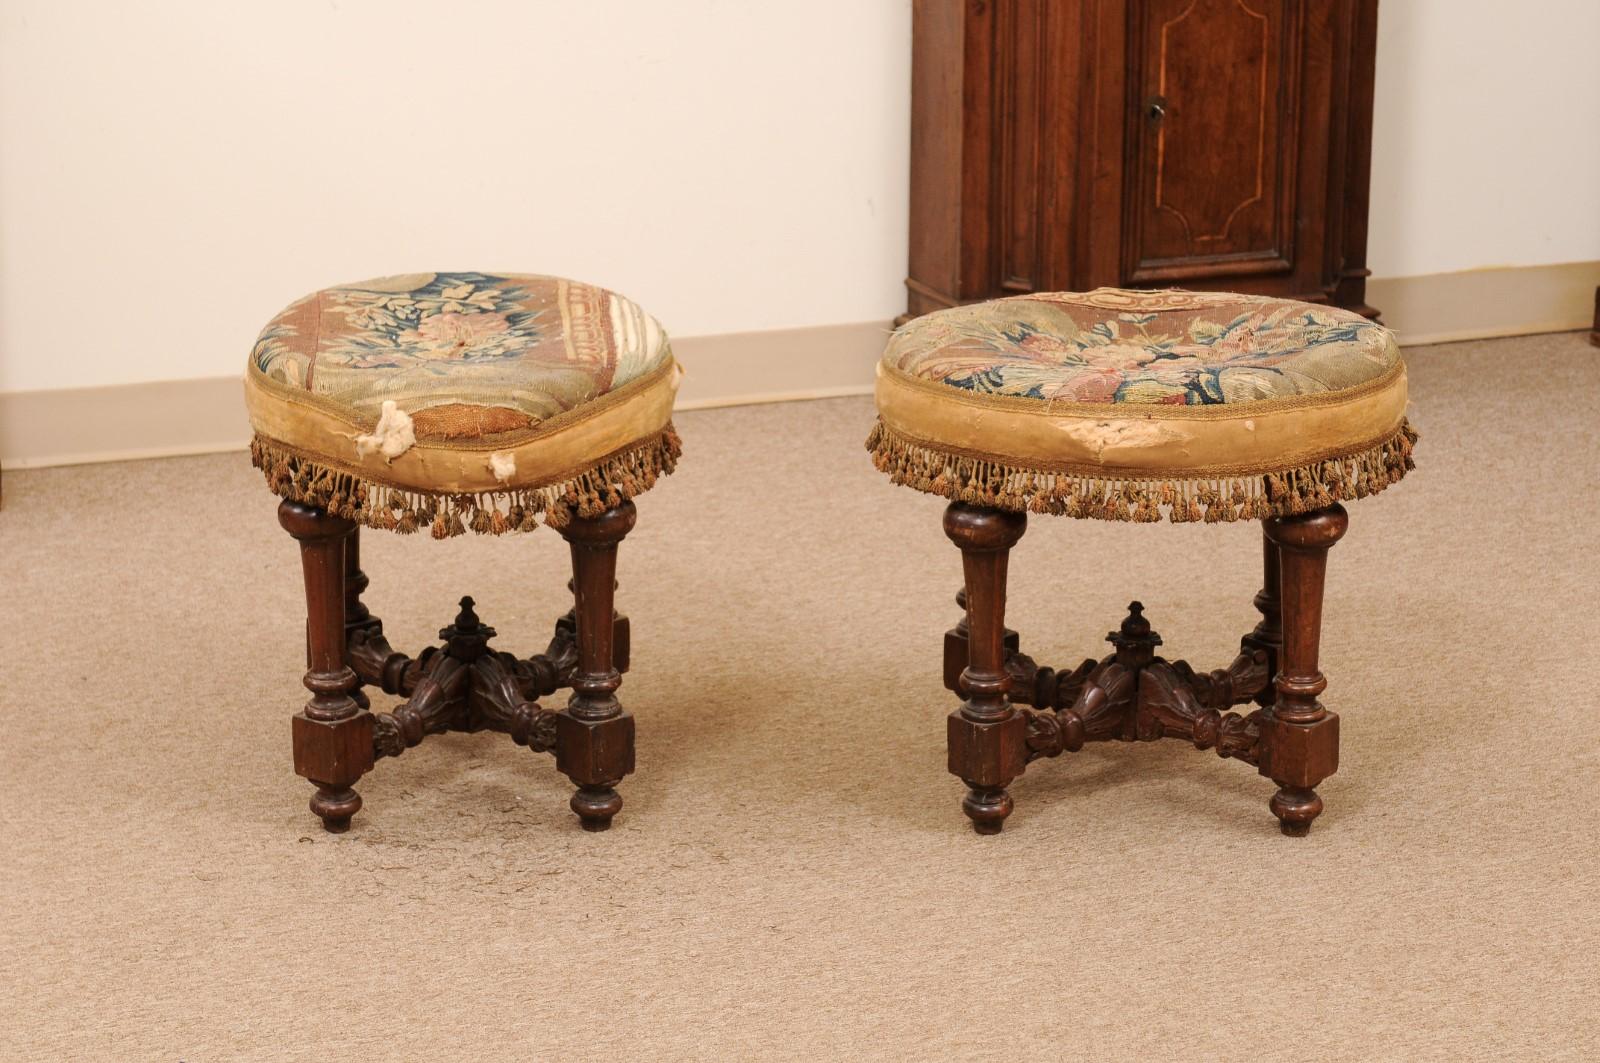 Pair of Oval 18th Century Italian Walnut Benches with Turned Legs  For Sale 2